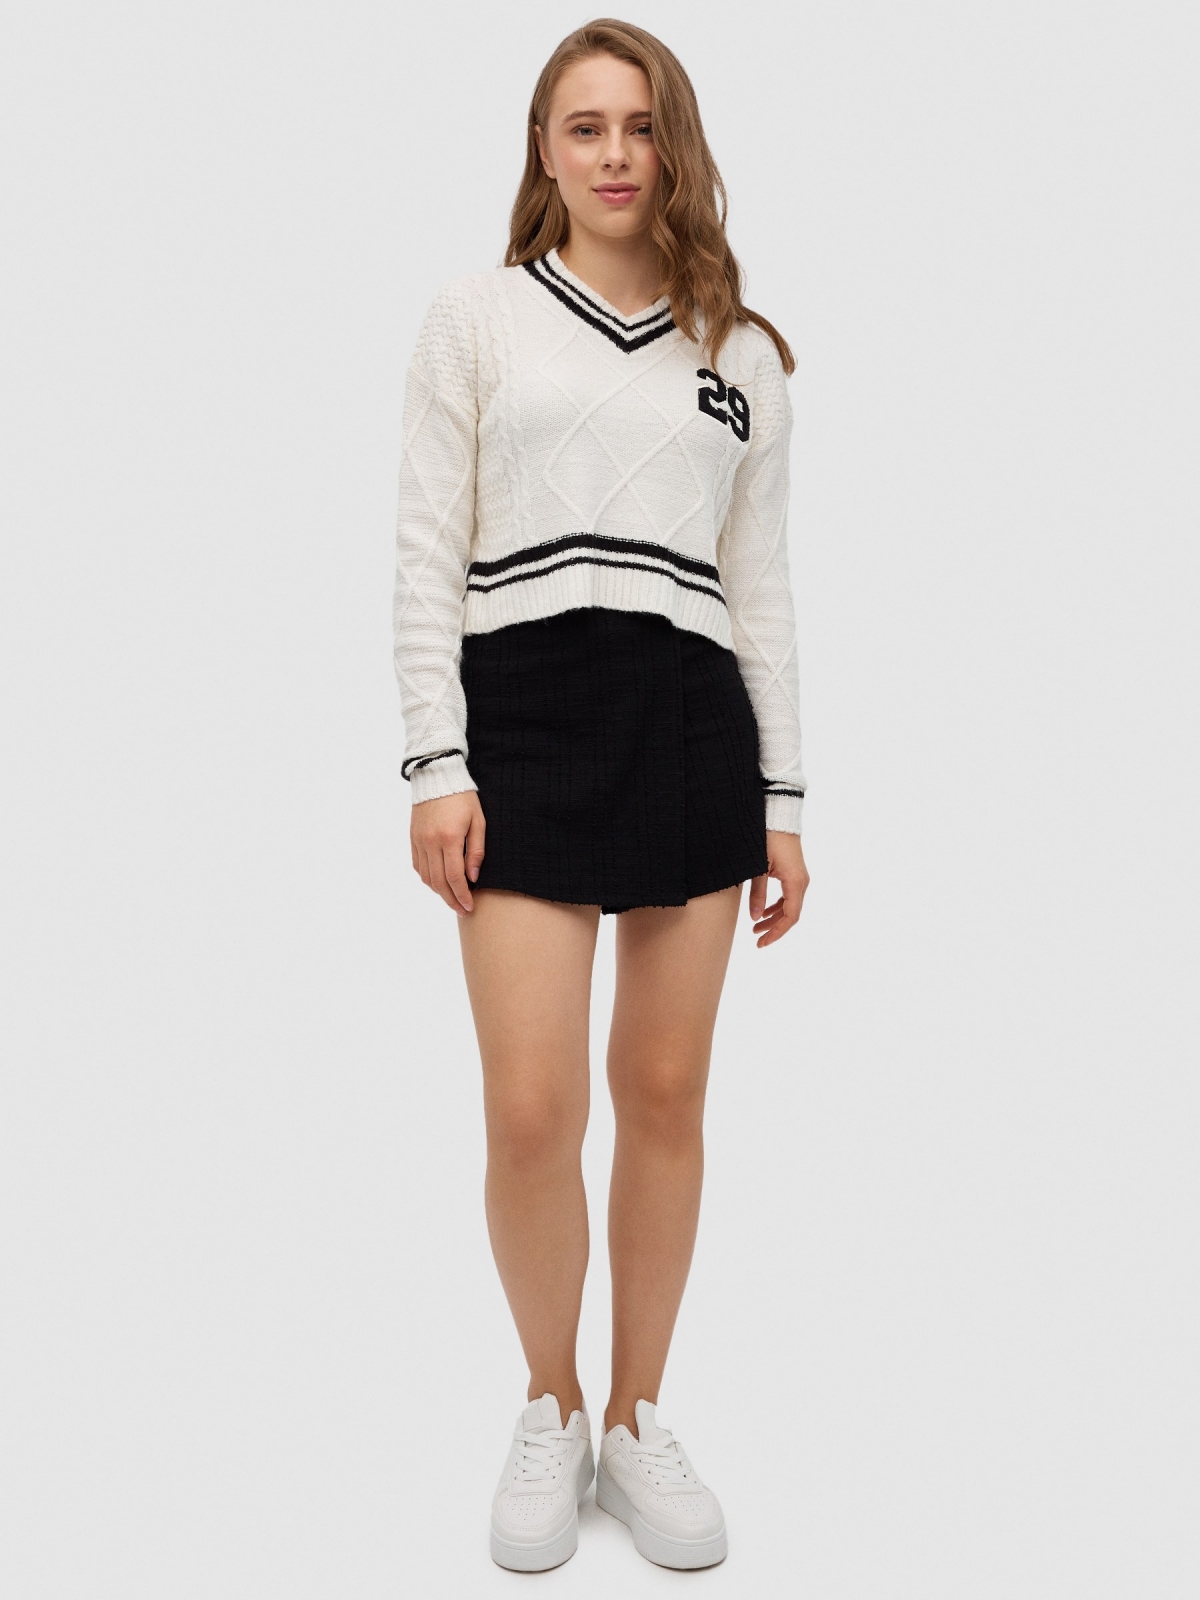 Jersey College 29 off white front view